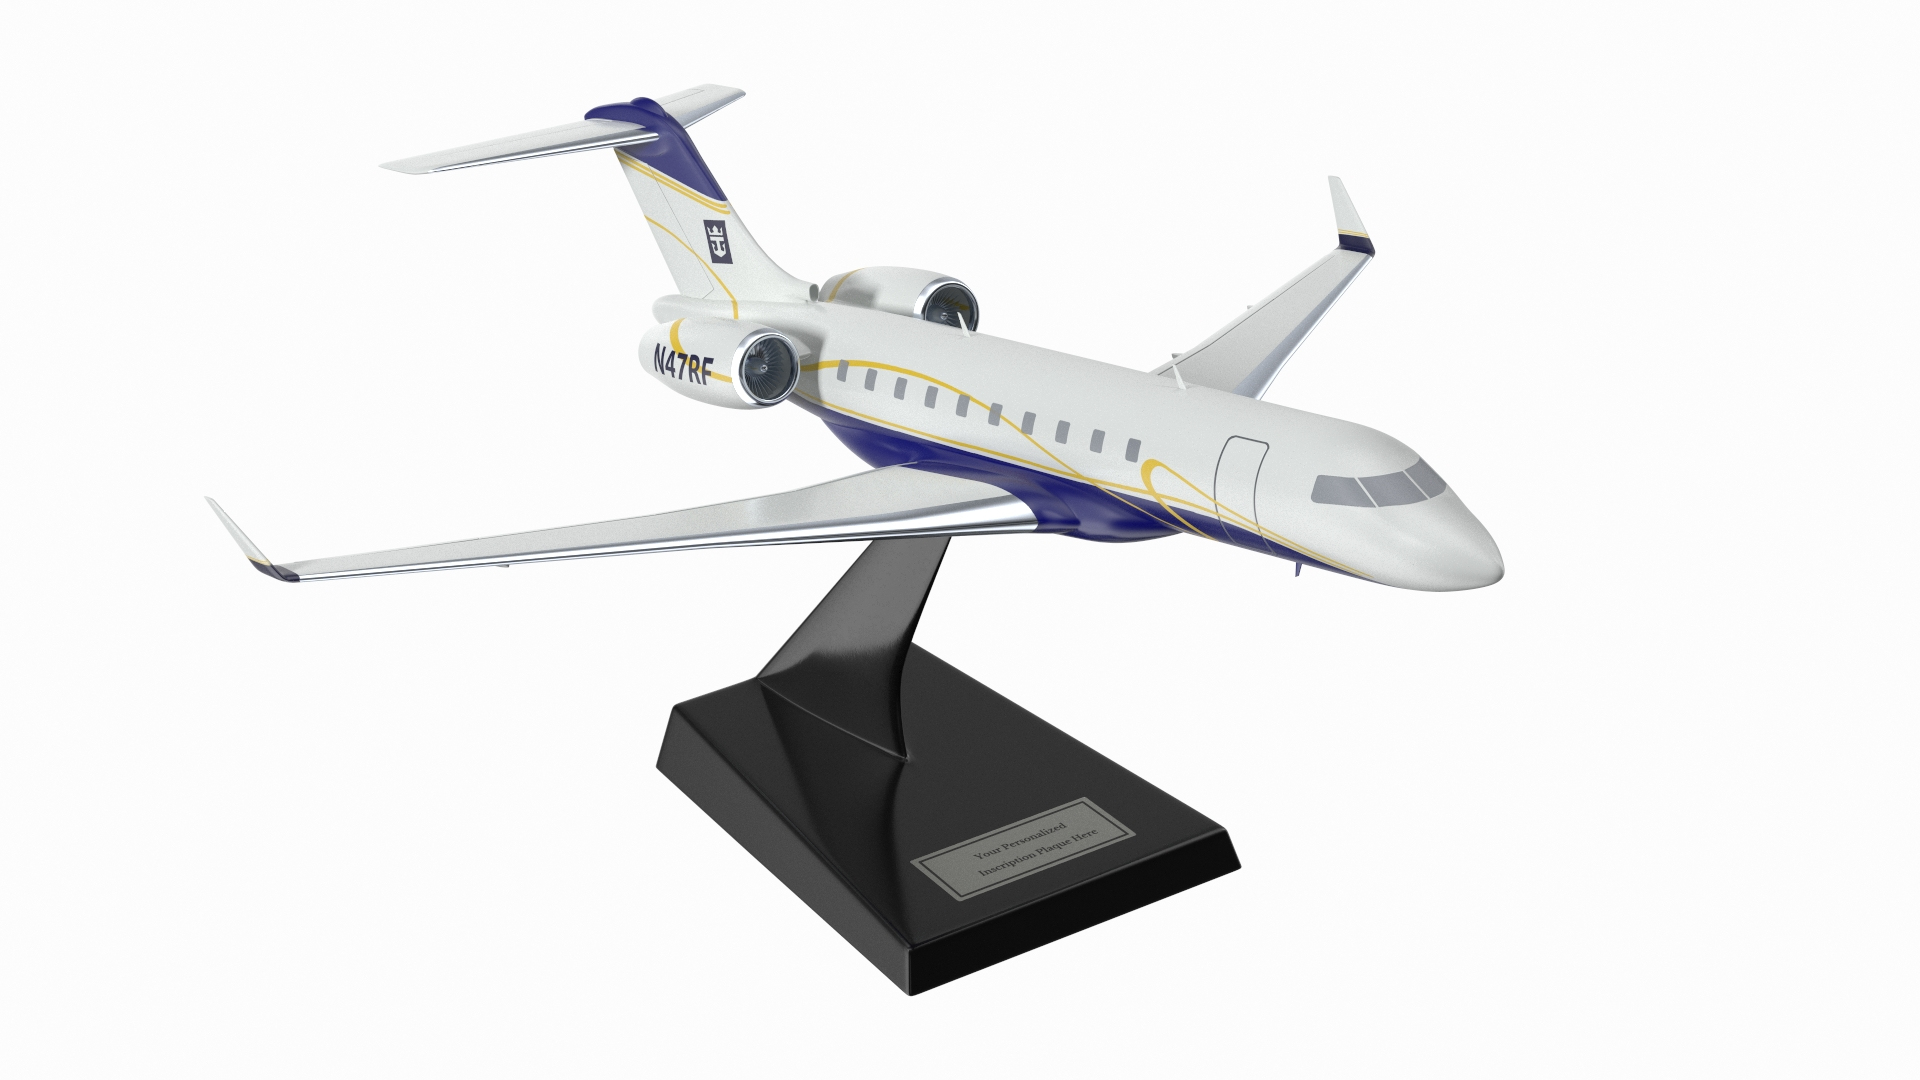 Bombardier Global 6000 is for sale - The Business Jet Guy